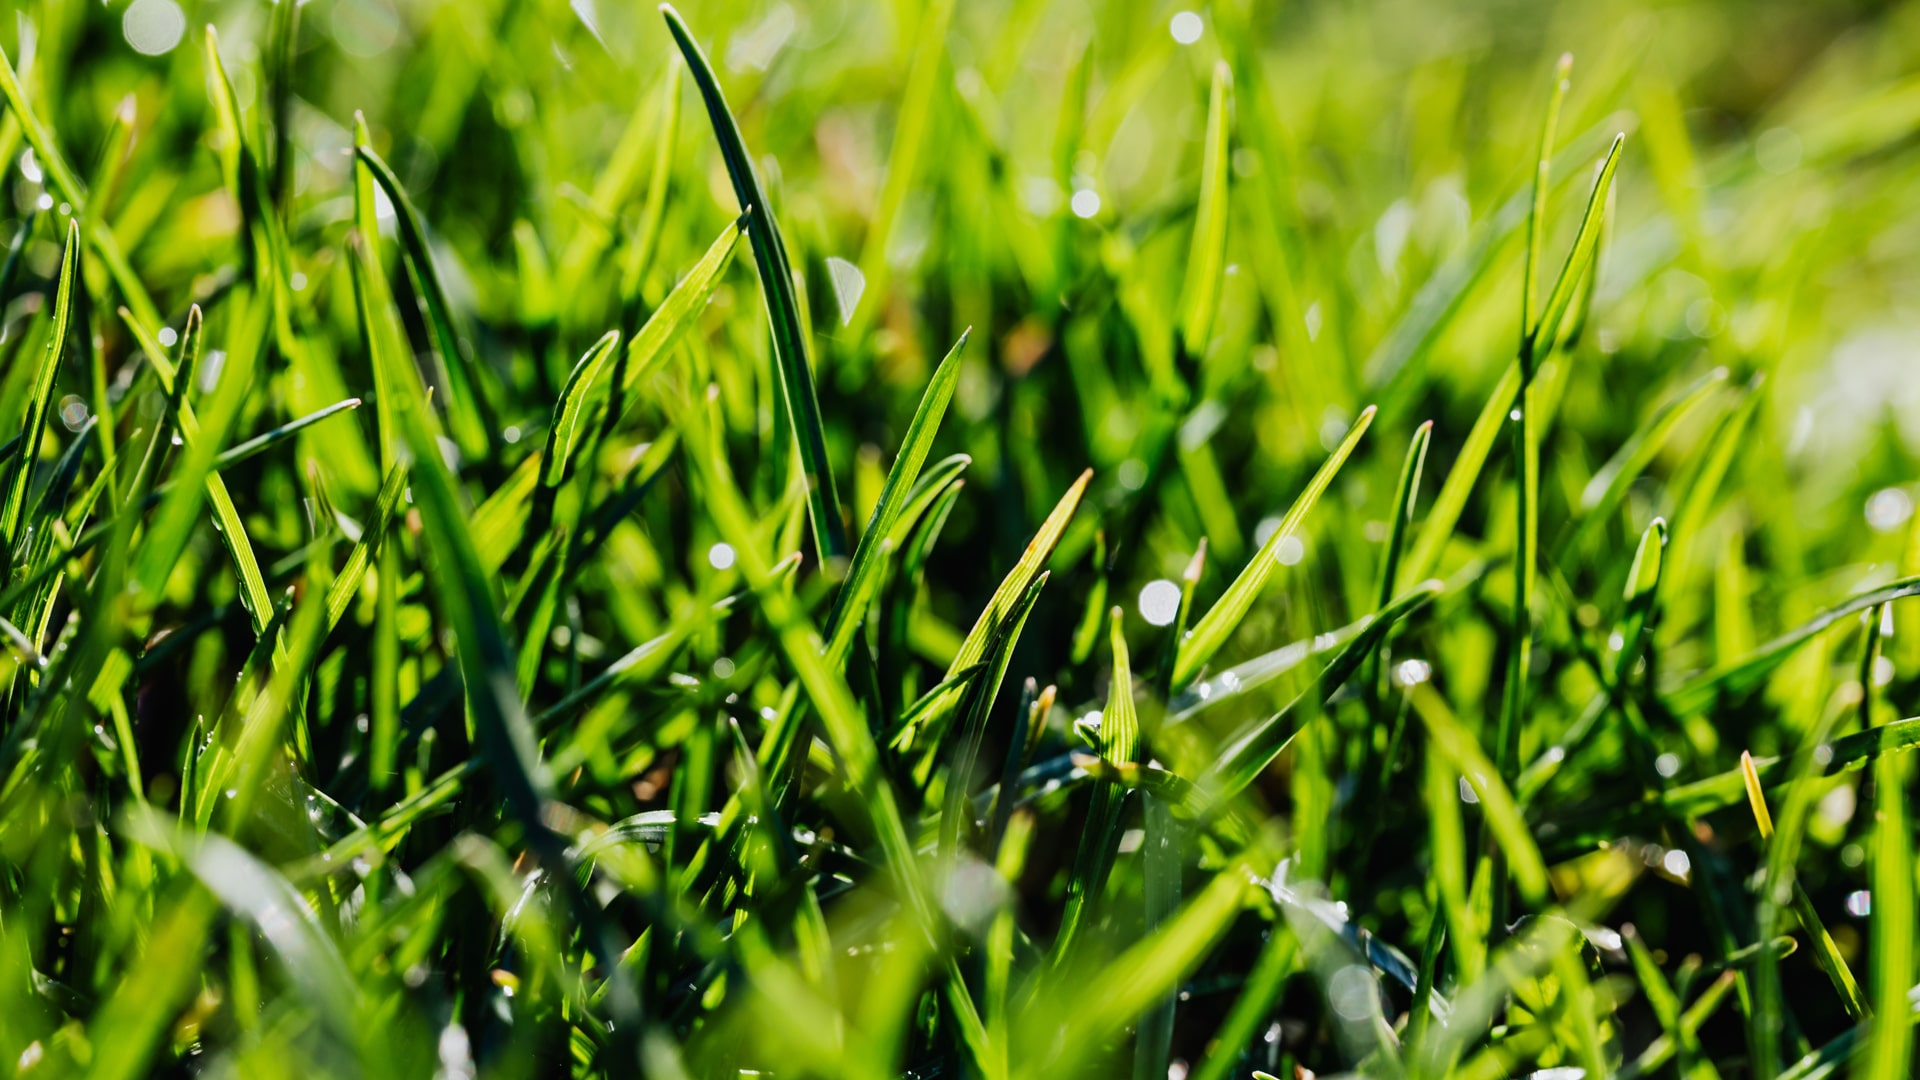 Green grass on lawn